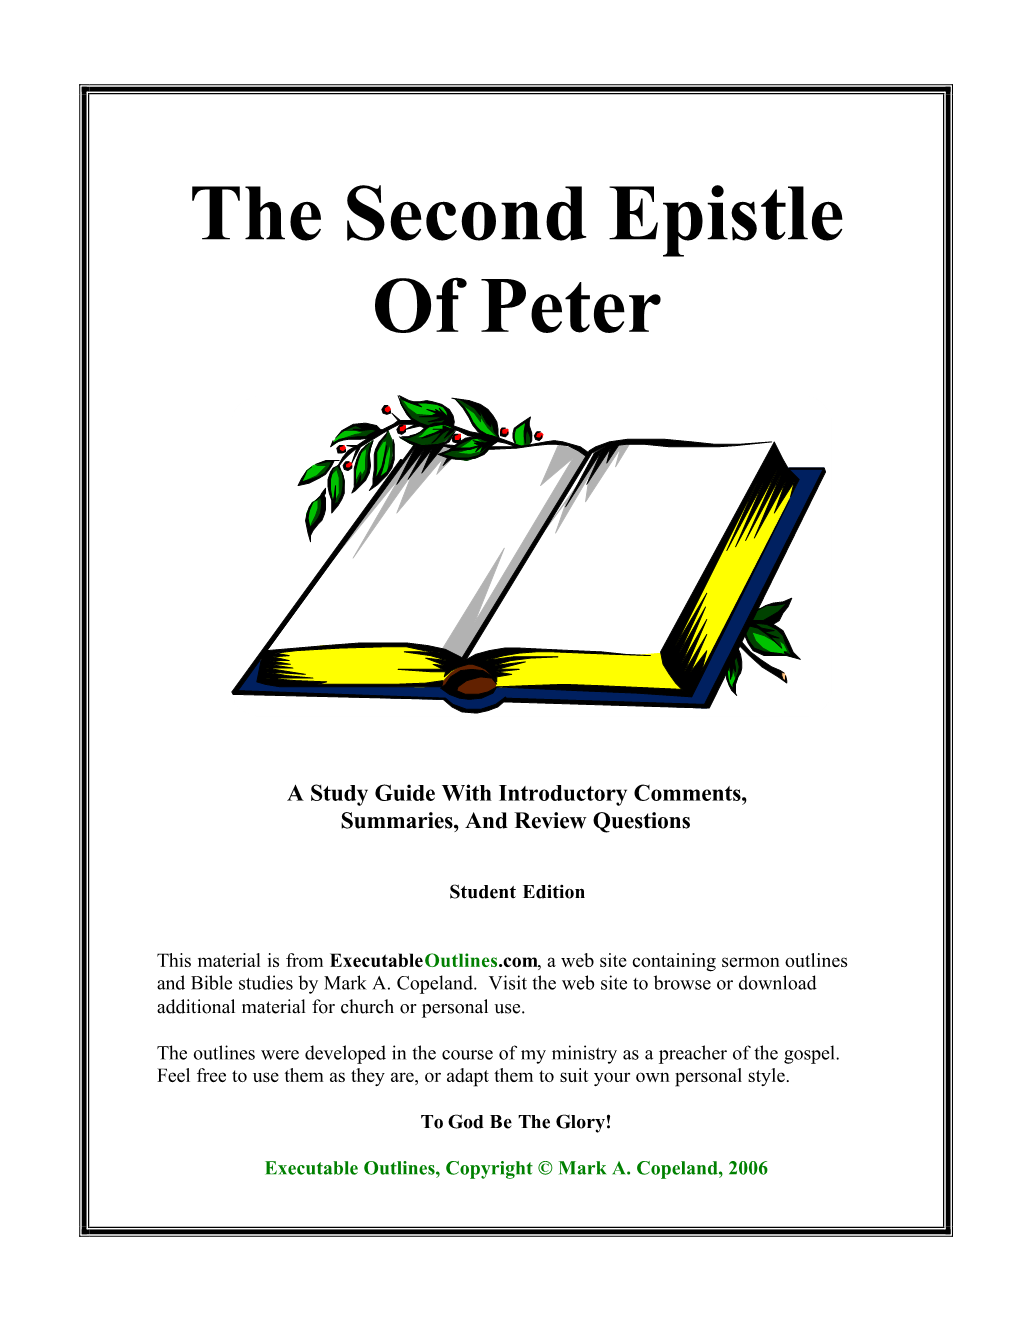 The Second Epistle of Peter